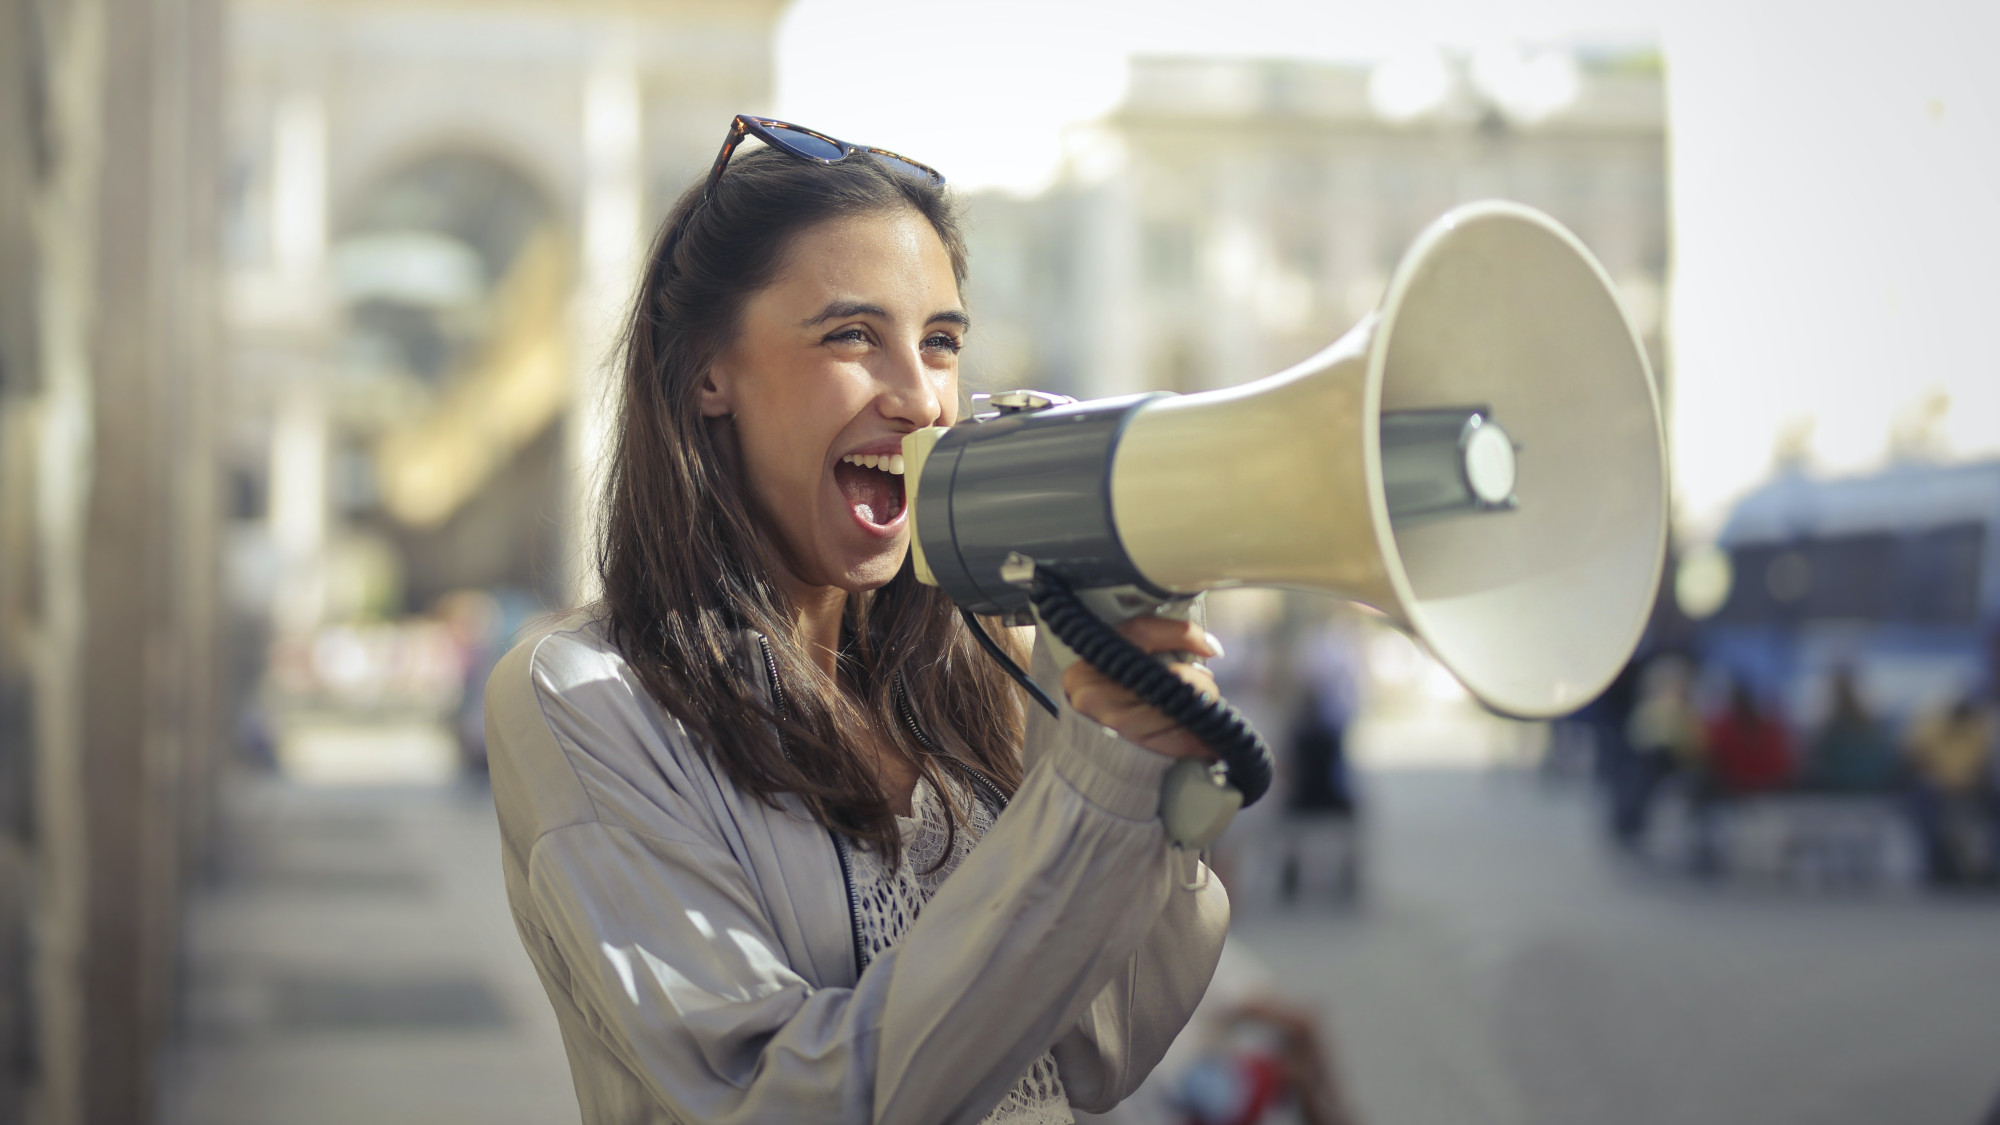 Woman standing on the street and using a megaphone for an announcement